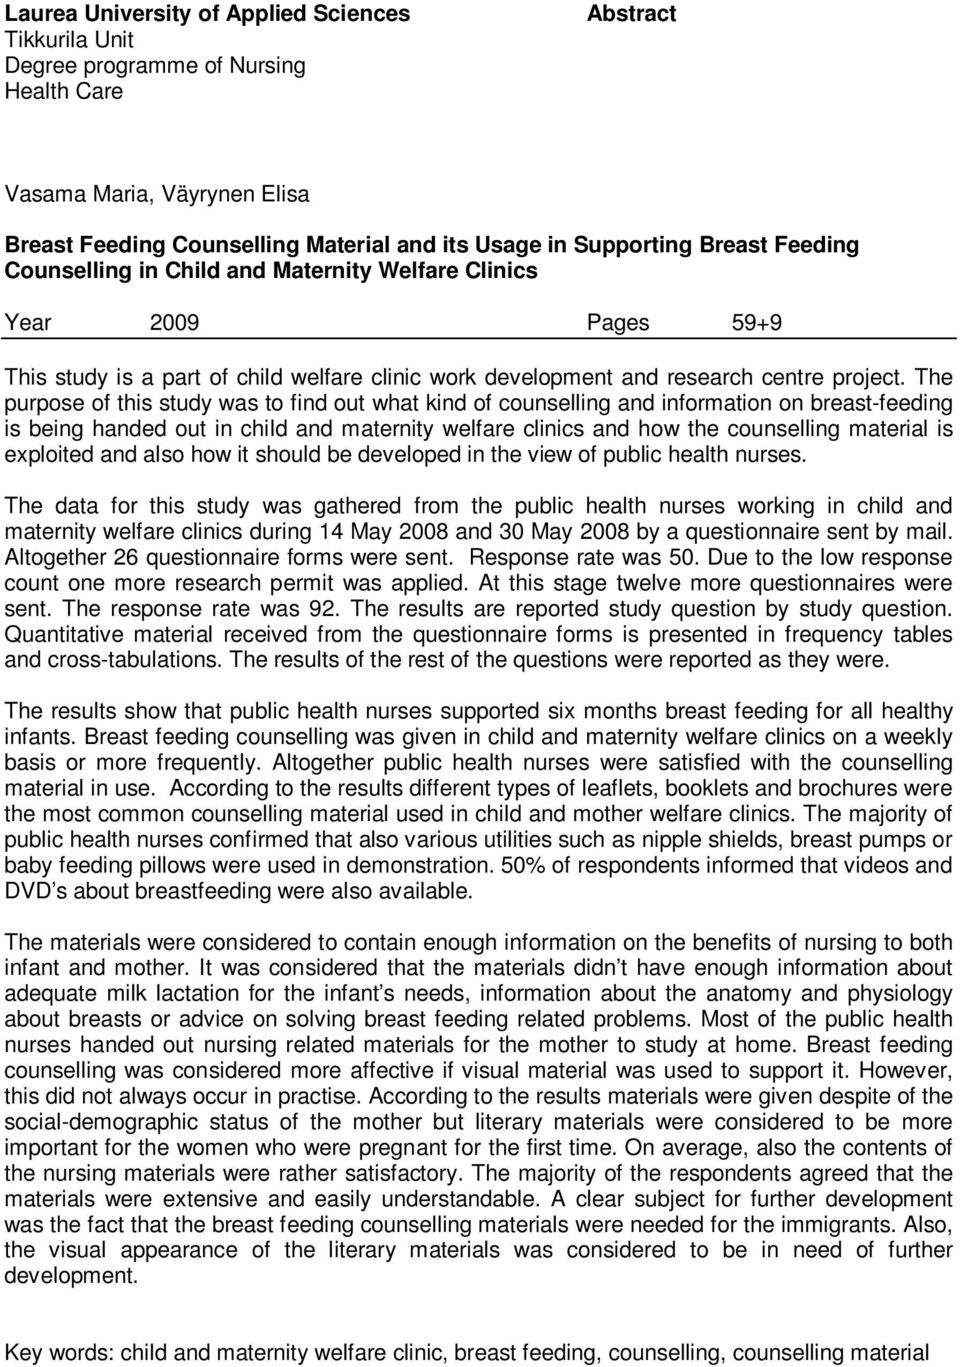 The purpose of this study was to find out what kind of counselling and information on breast-feeding is being handed out in child and maternity welfare clinics and how the counselling material is